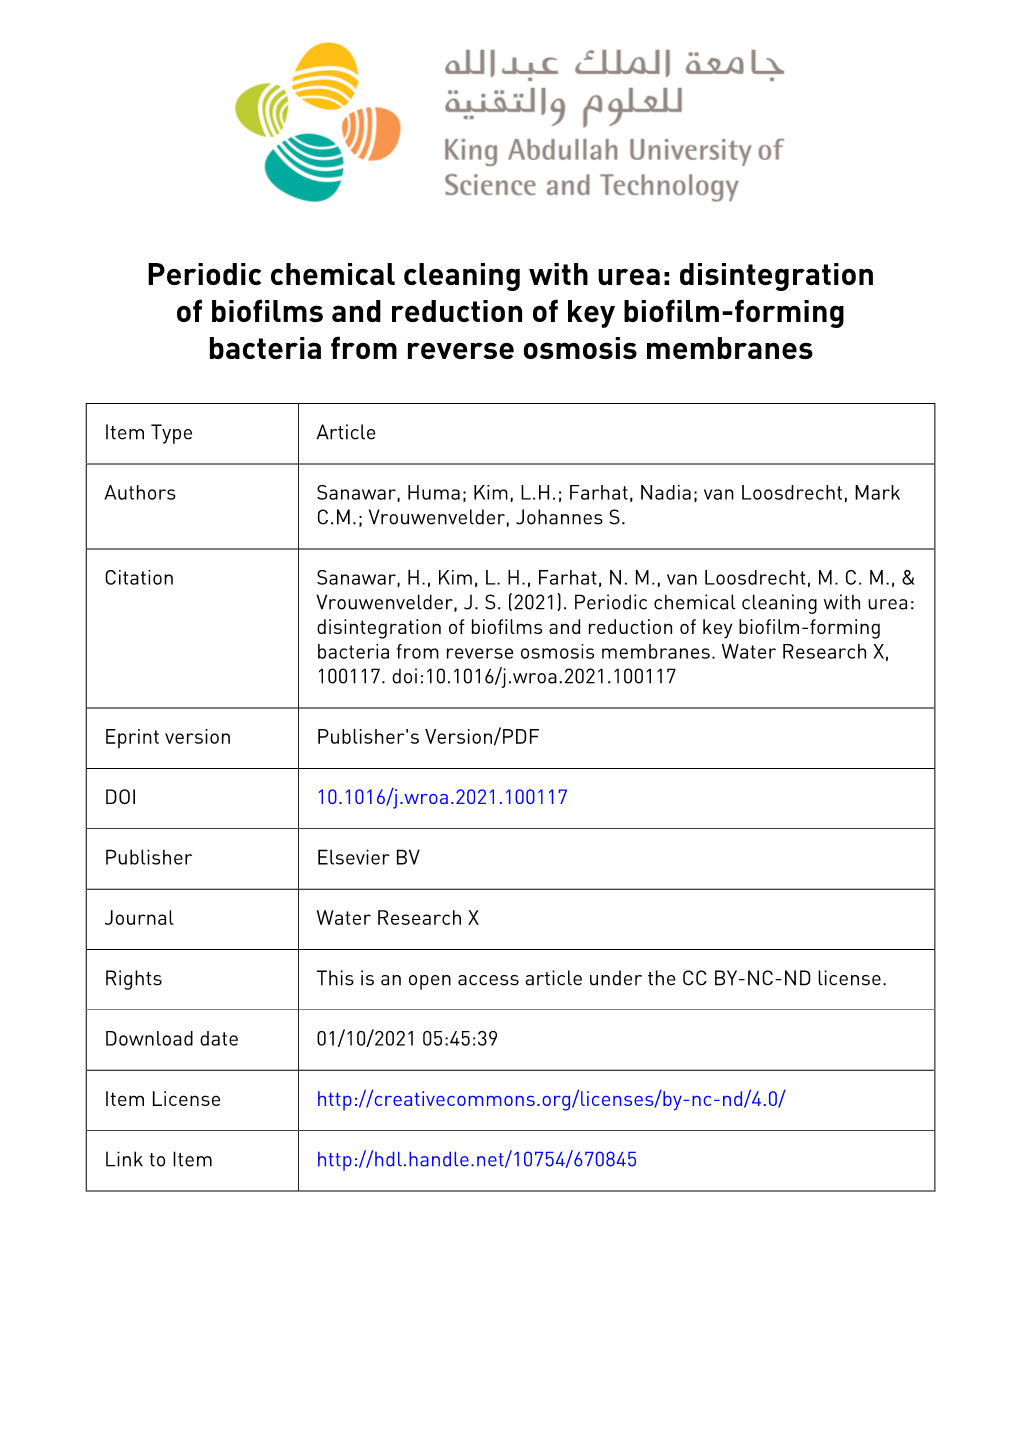 Periodic Chemical Cleaning with Urea: Disintegration of Biofilms and Reduction of Key Biofilm-Forming Bacteria from Reverse Osmosis Membranes